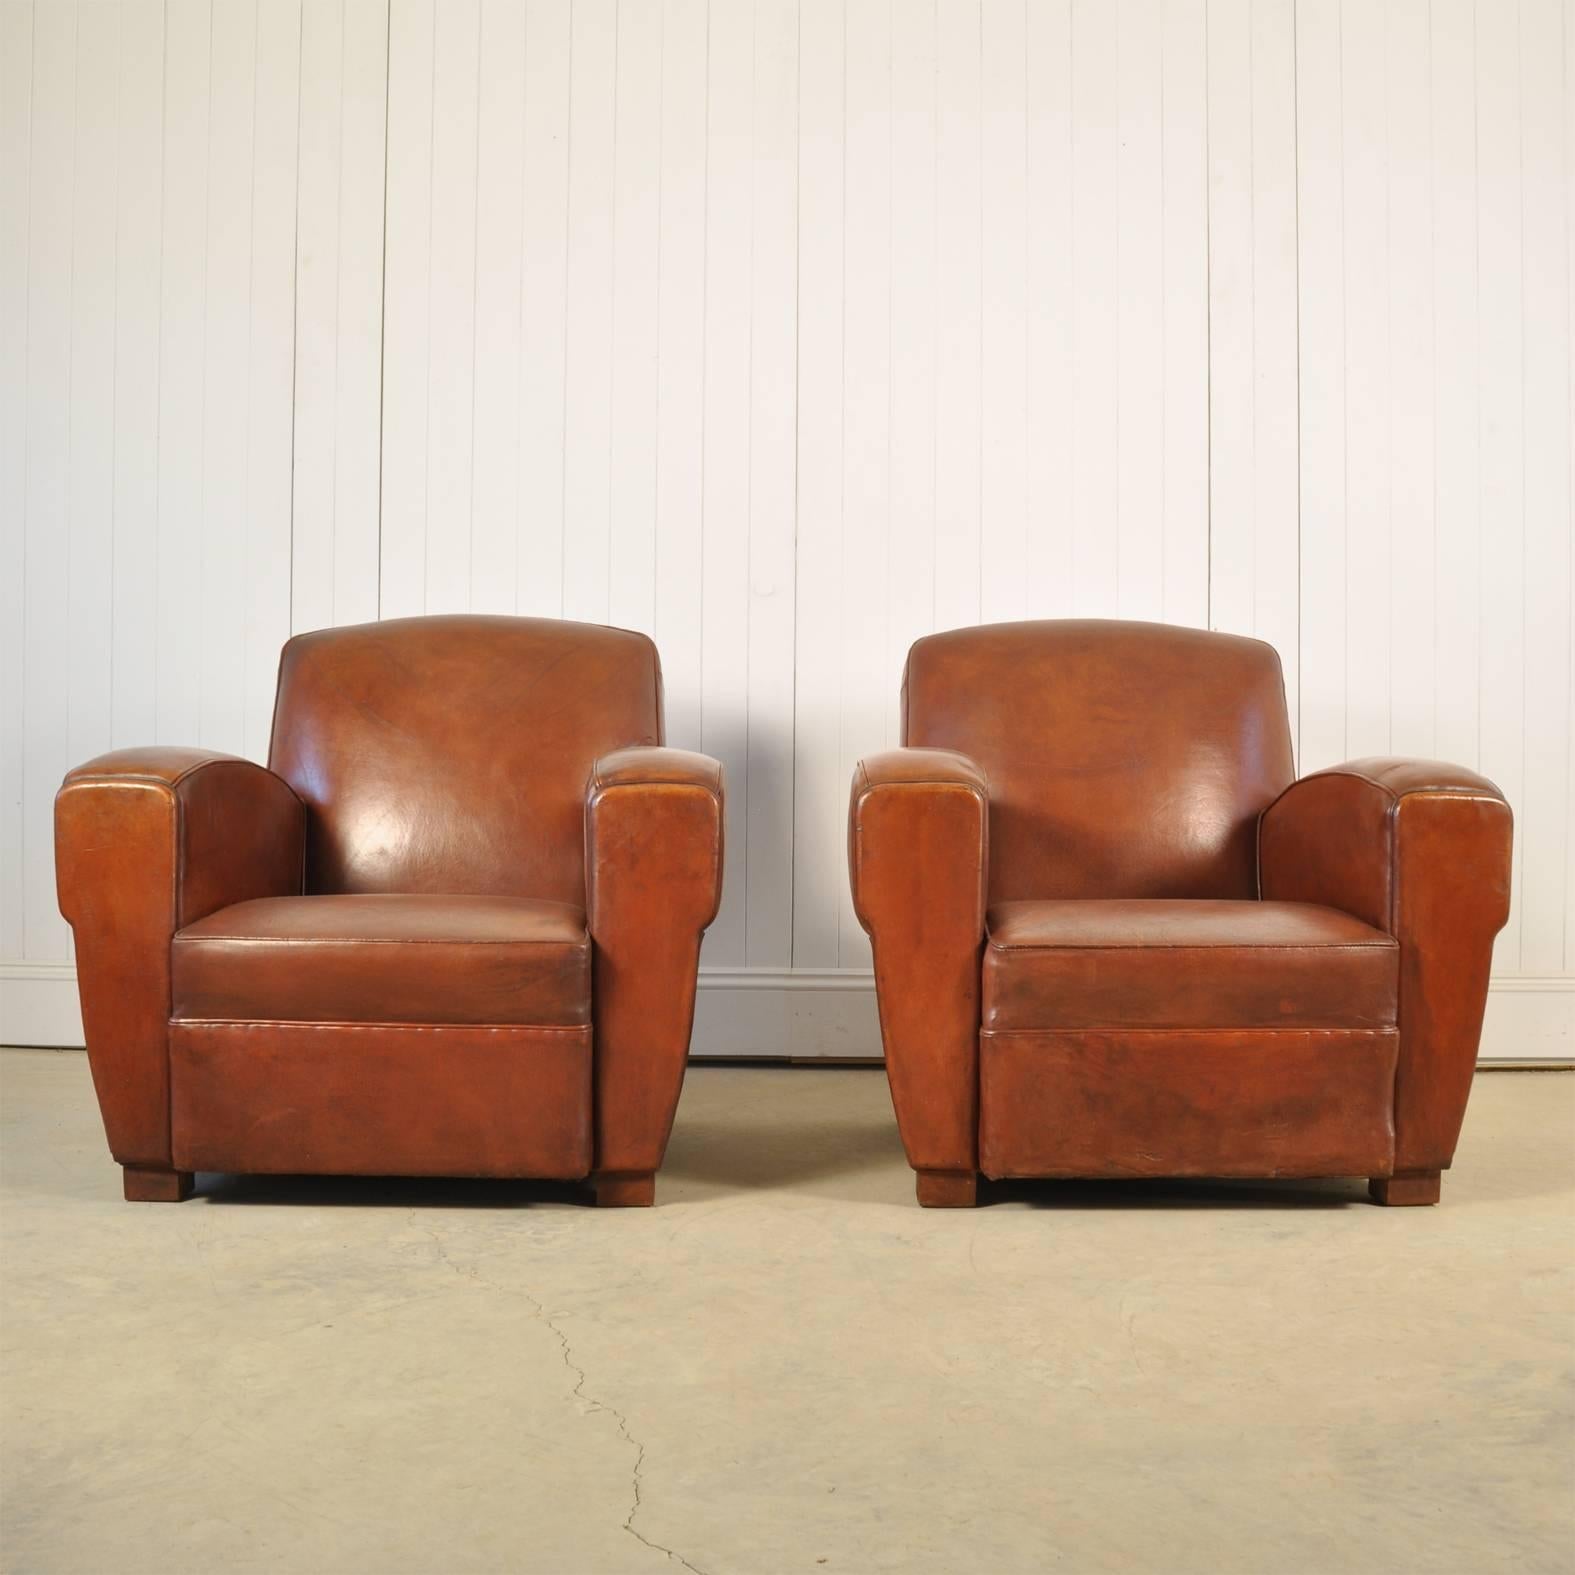 Sourced on a recent trip to the South of France, these vintage leather armchairs are the best we have found in the last 10 years. 

Classic 1940s shape with the sweeping arms.

Apart from being re-sprung these are in completely original